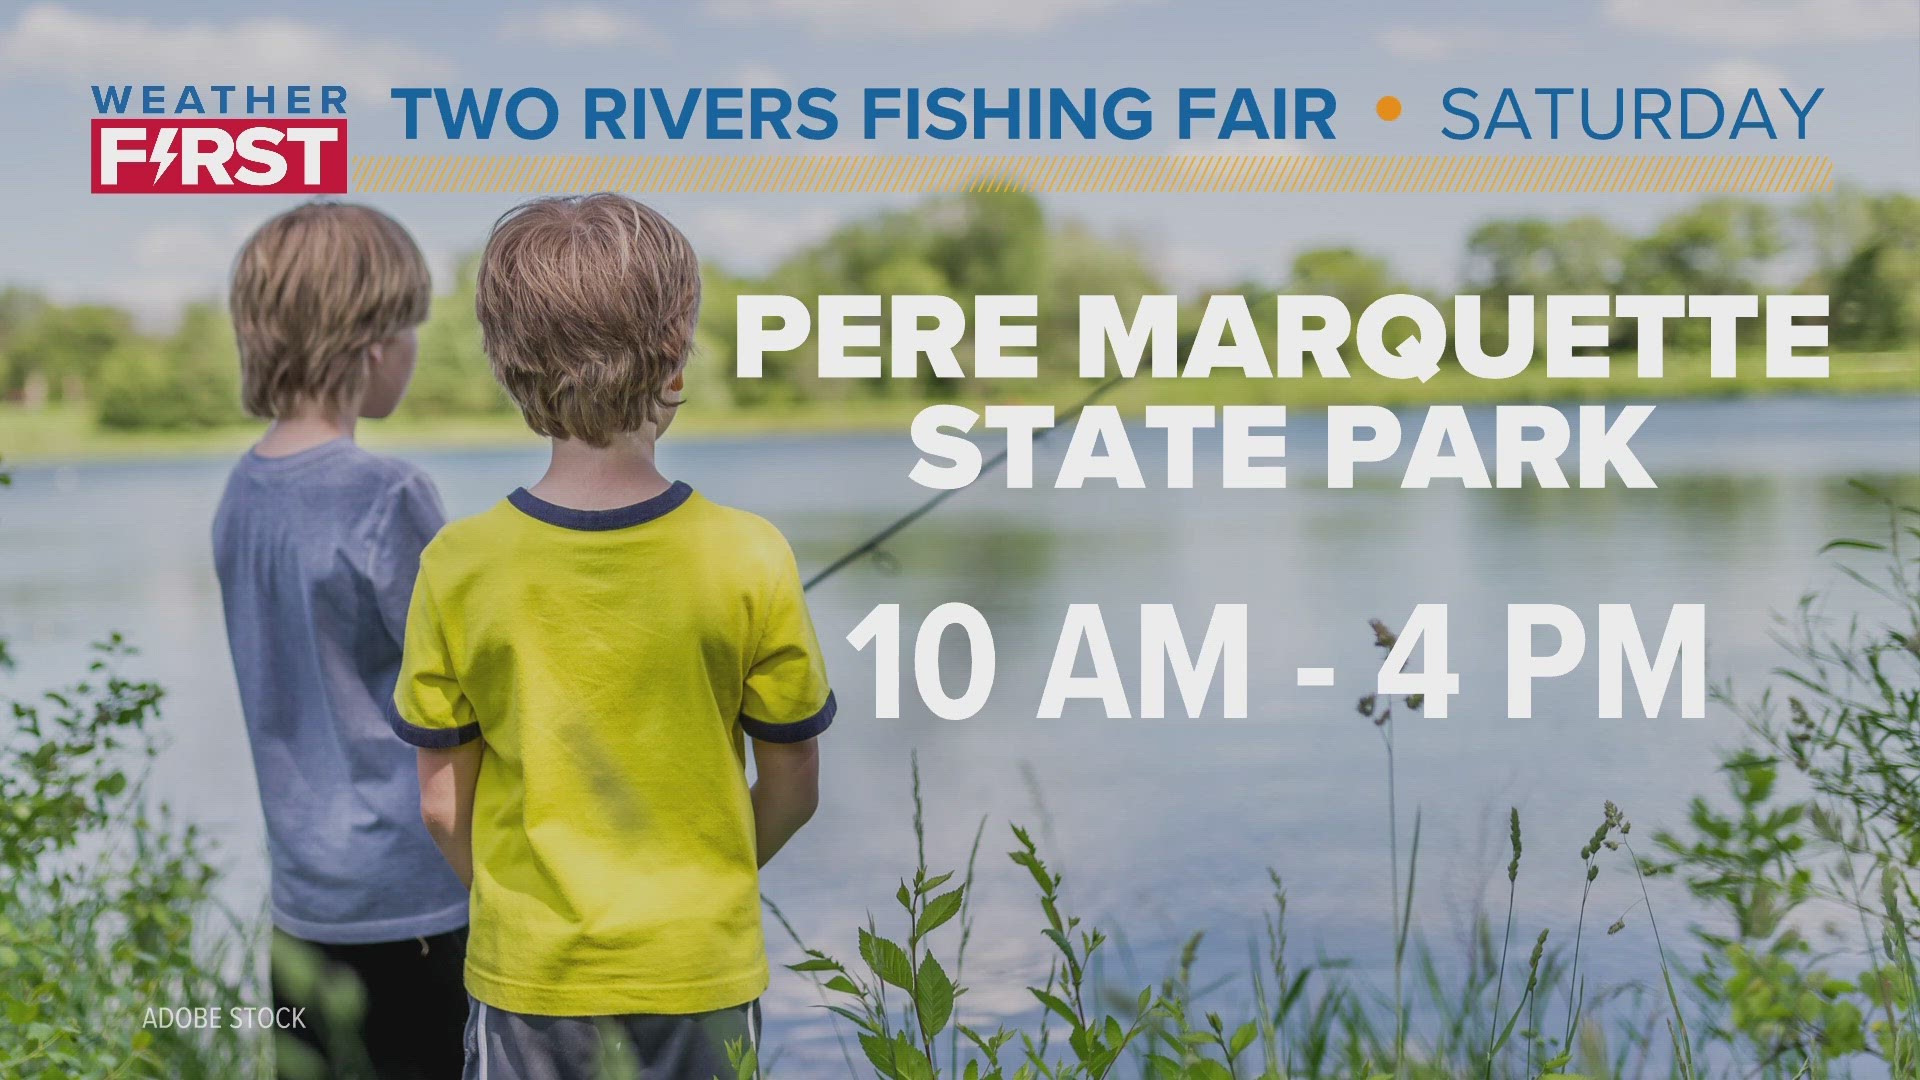 Scott Connell visits Pere Marquette Fishing Fair in Grafton, Illinois. The Two Rivers Family Fishing Fair is on Saturday, June 10.